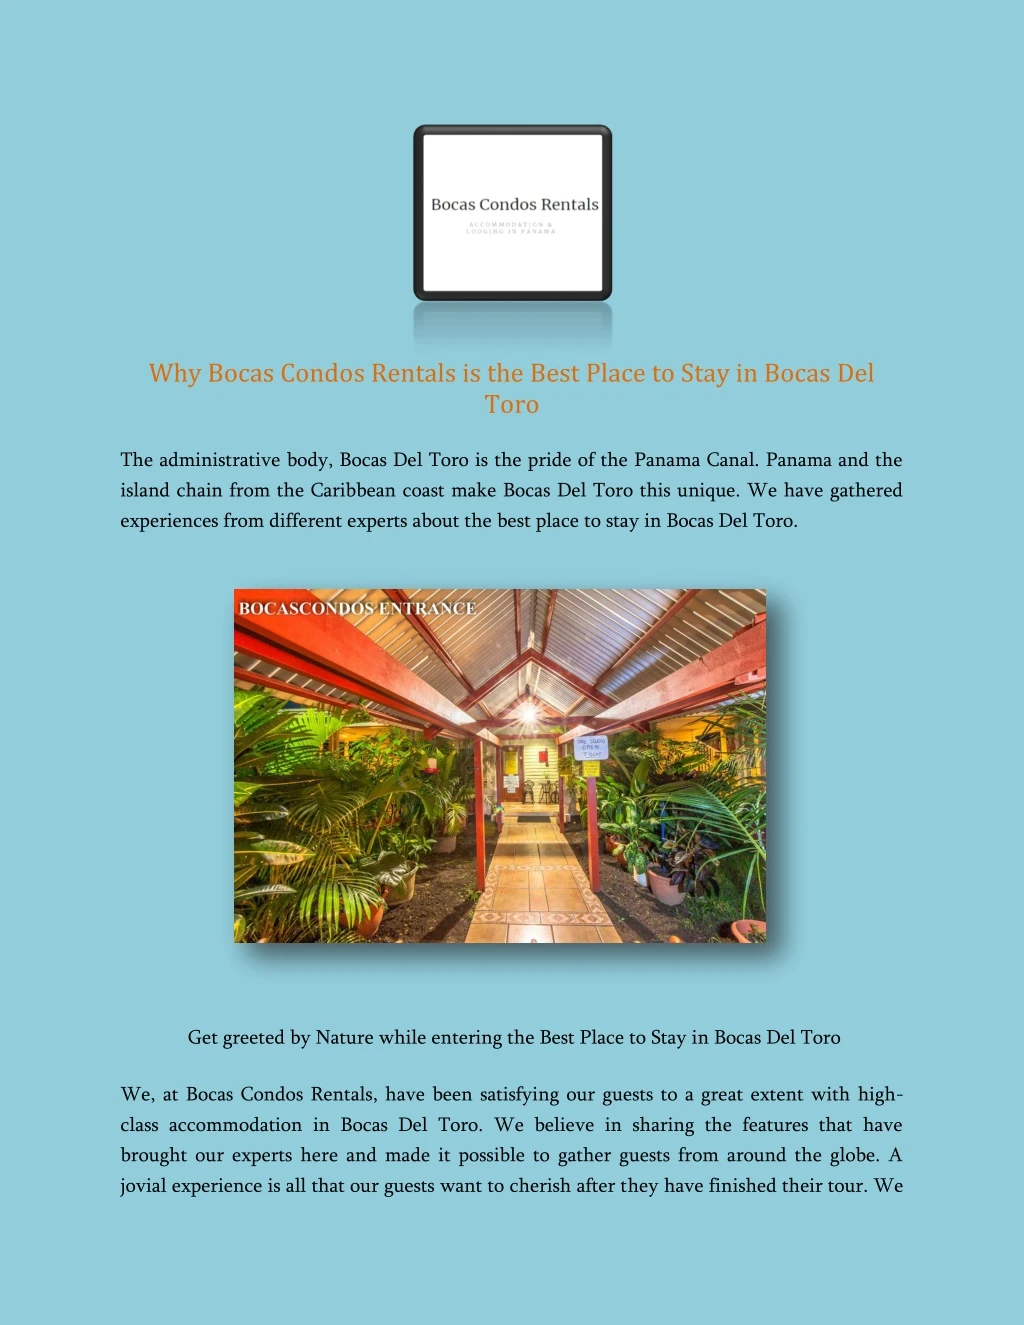 why bocas condos rentals is the best place